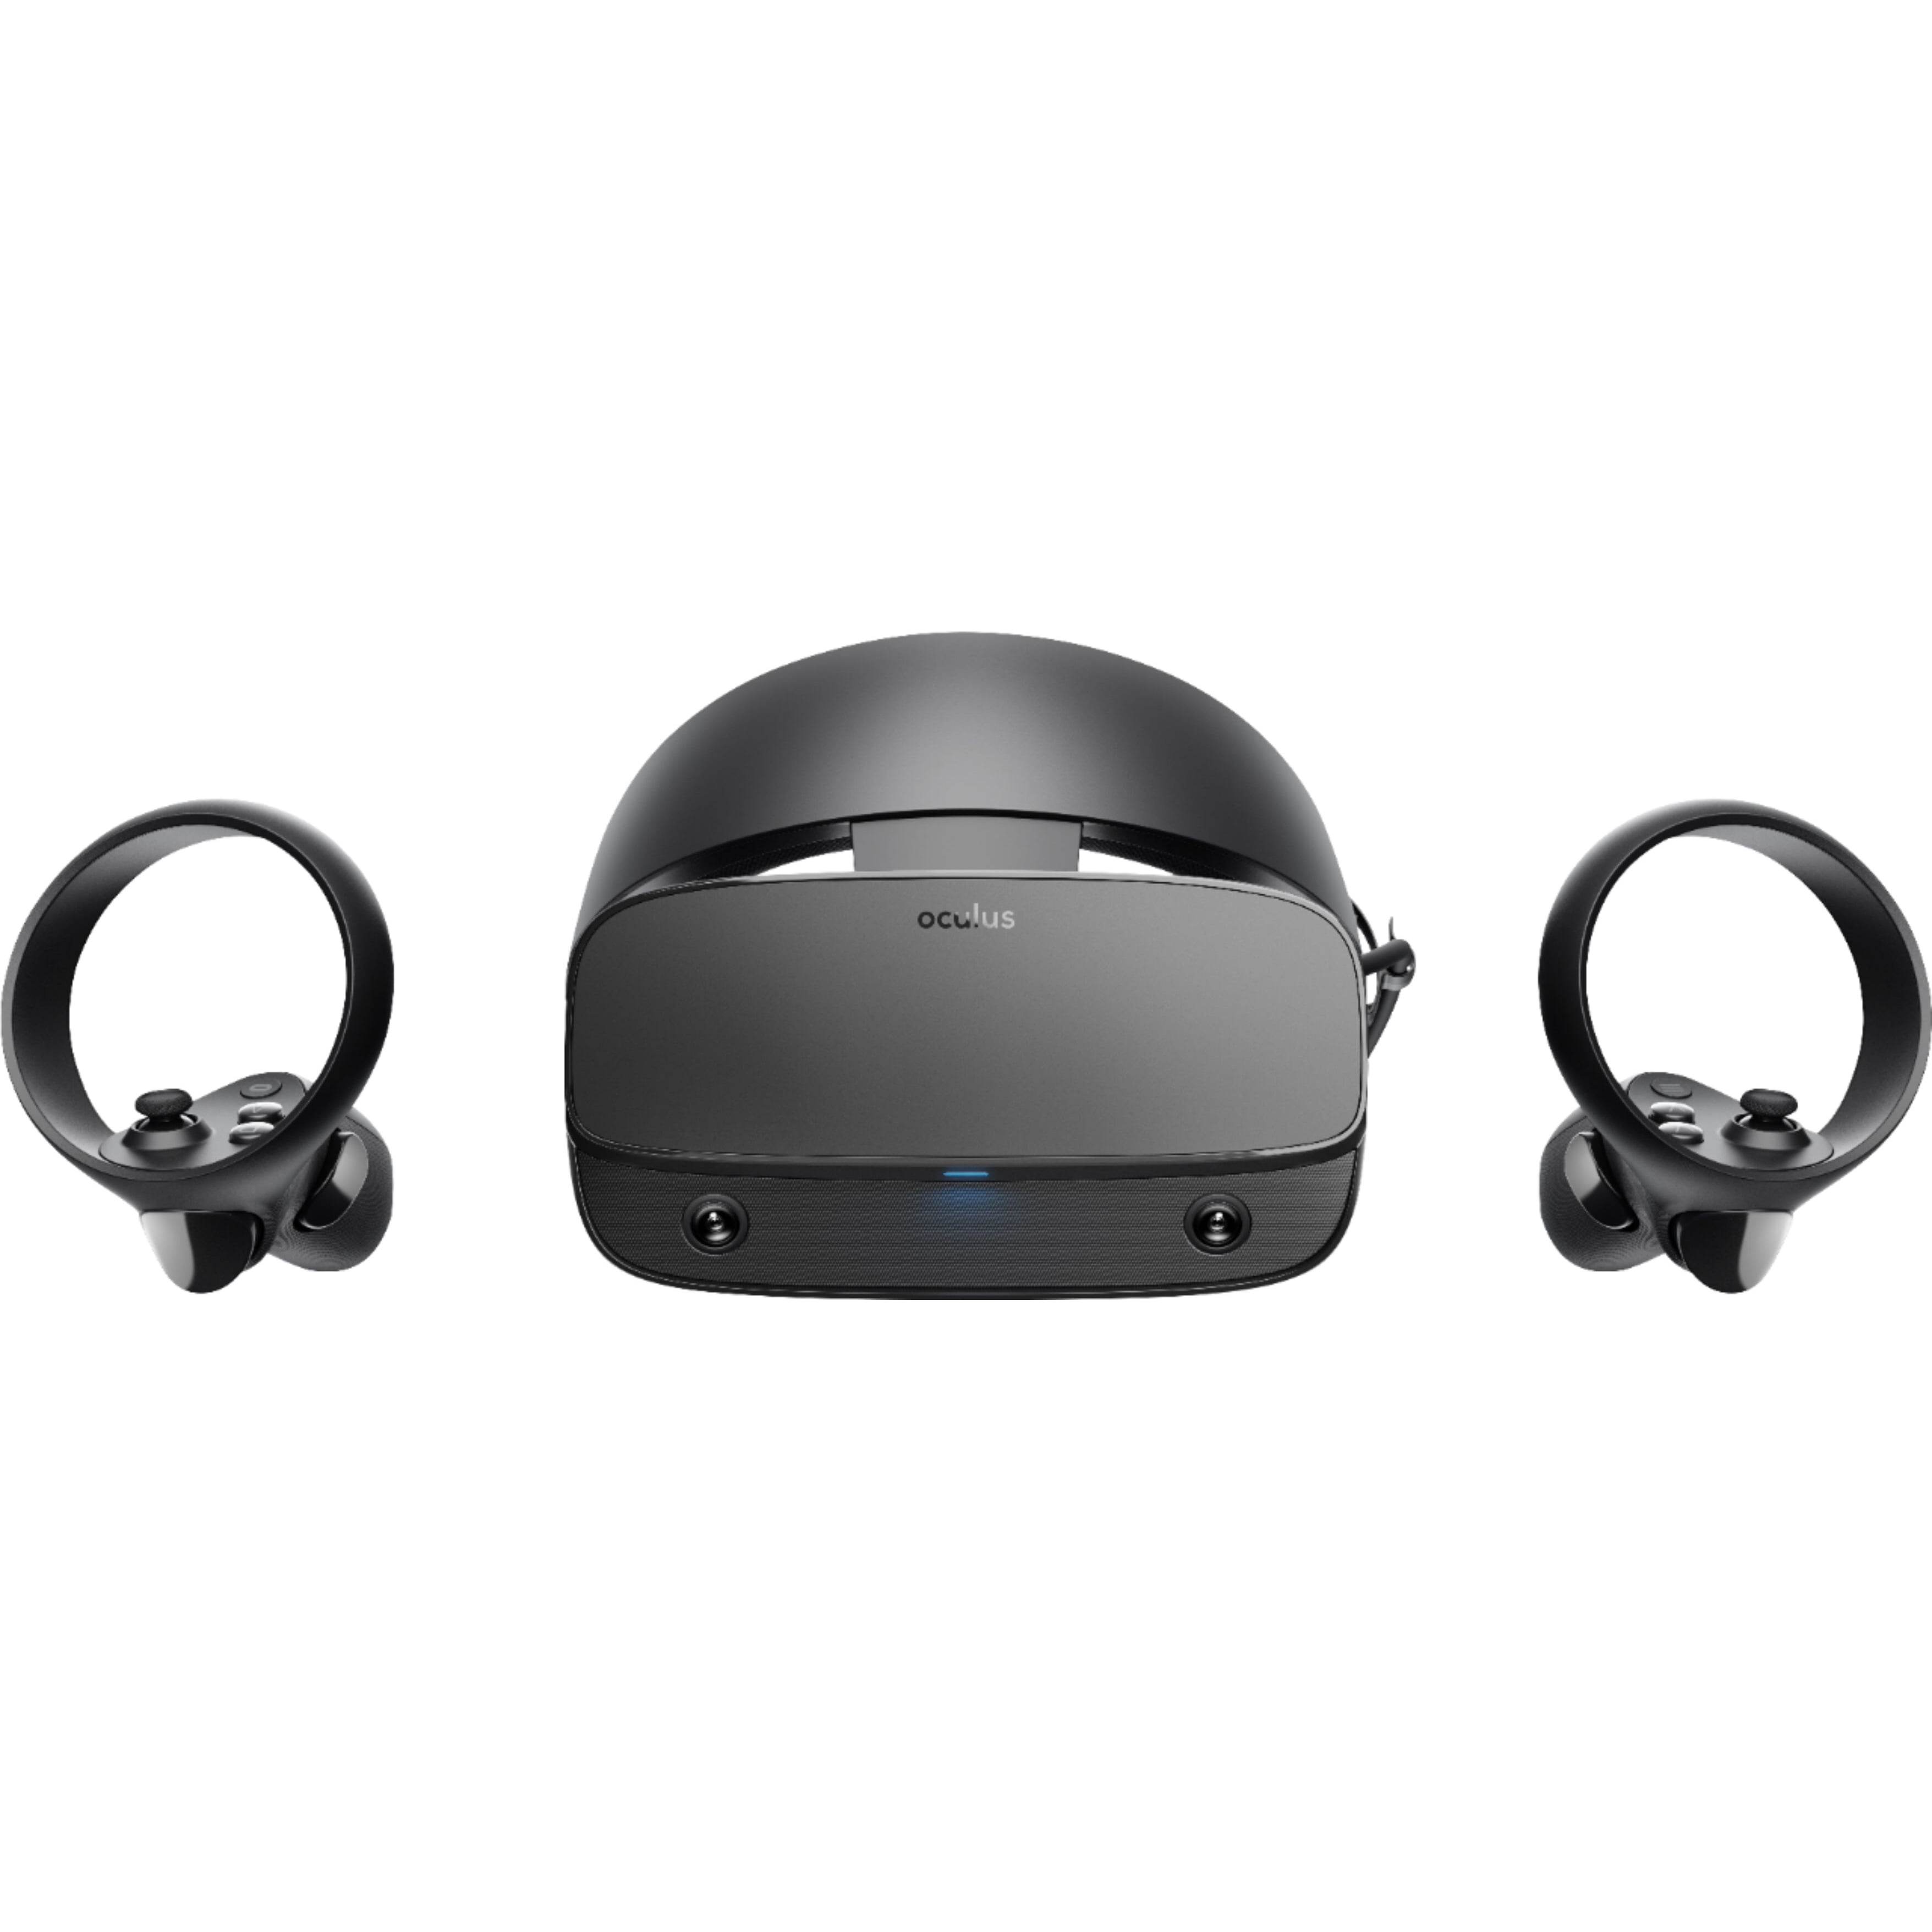 Oculus Rift S PC Powered VR Gaming Headset Black Touch 3D Audio, Built-in Room-Scale Insight Tracking, Fit Wheel Adjustable Halo Headband - Walmart.com